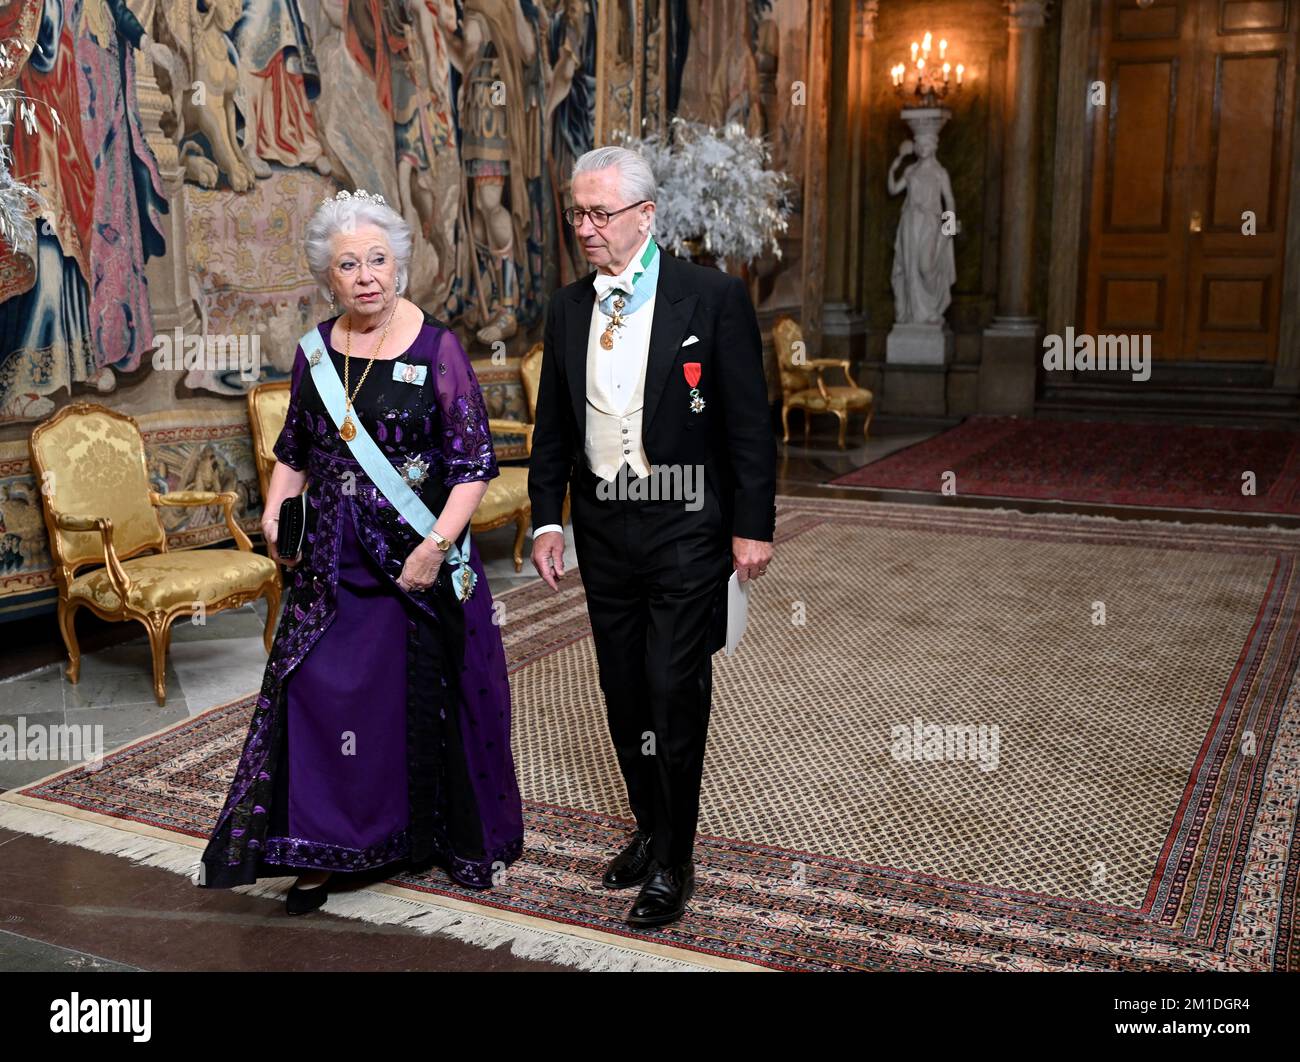 Princess Christina and Tord Magnuson attend the King's dinner for the Nobel laureates at the Royal Palace in Stockholm, Sweden, 11 December 2022. Photo: Pontus Lundahl / TT / 10050 Stock Photo